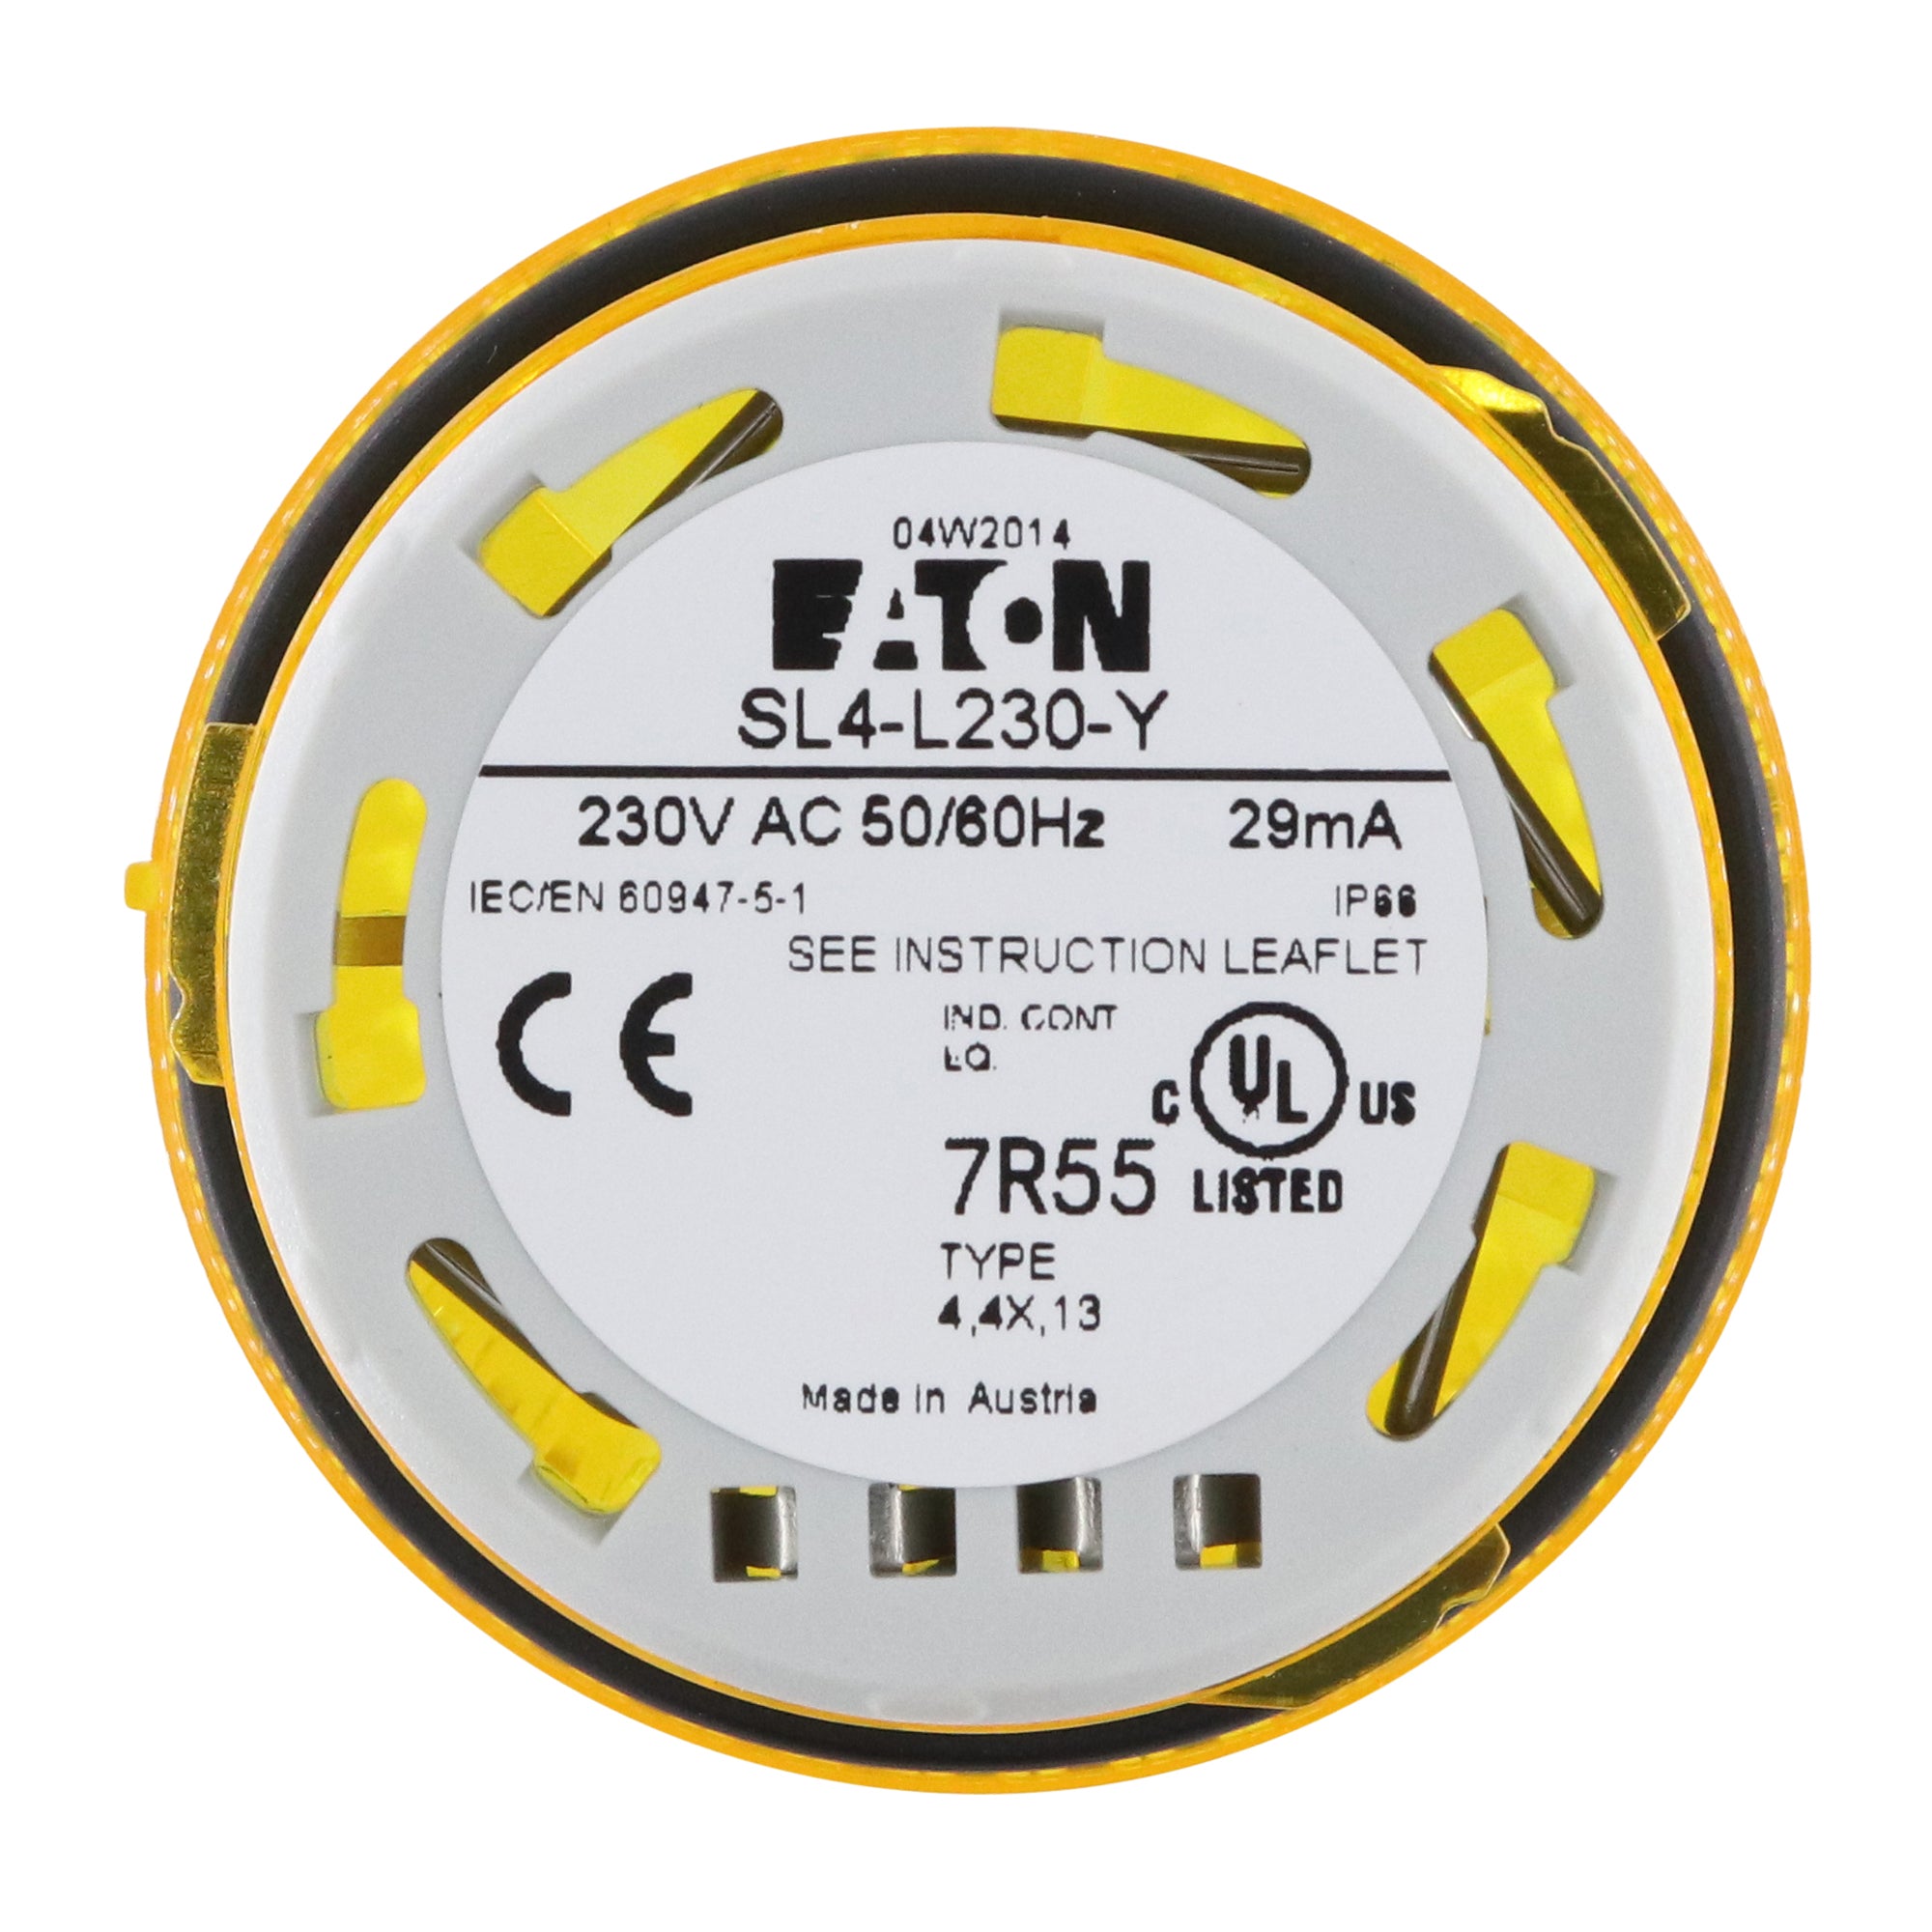 EATON, EATON SL4-L230-Y LED CONTINUOUS TOWER LIGHT BEACON, 40MM,230V, YELLOW